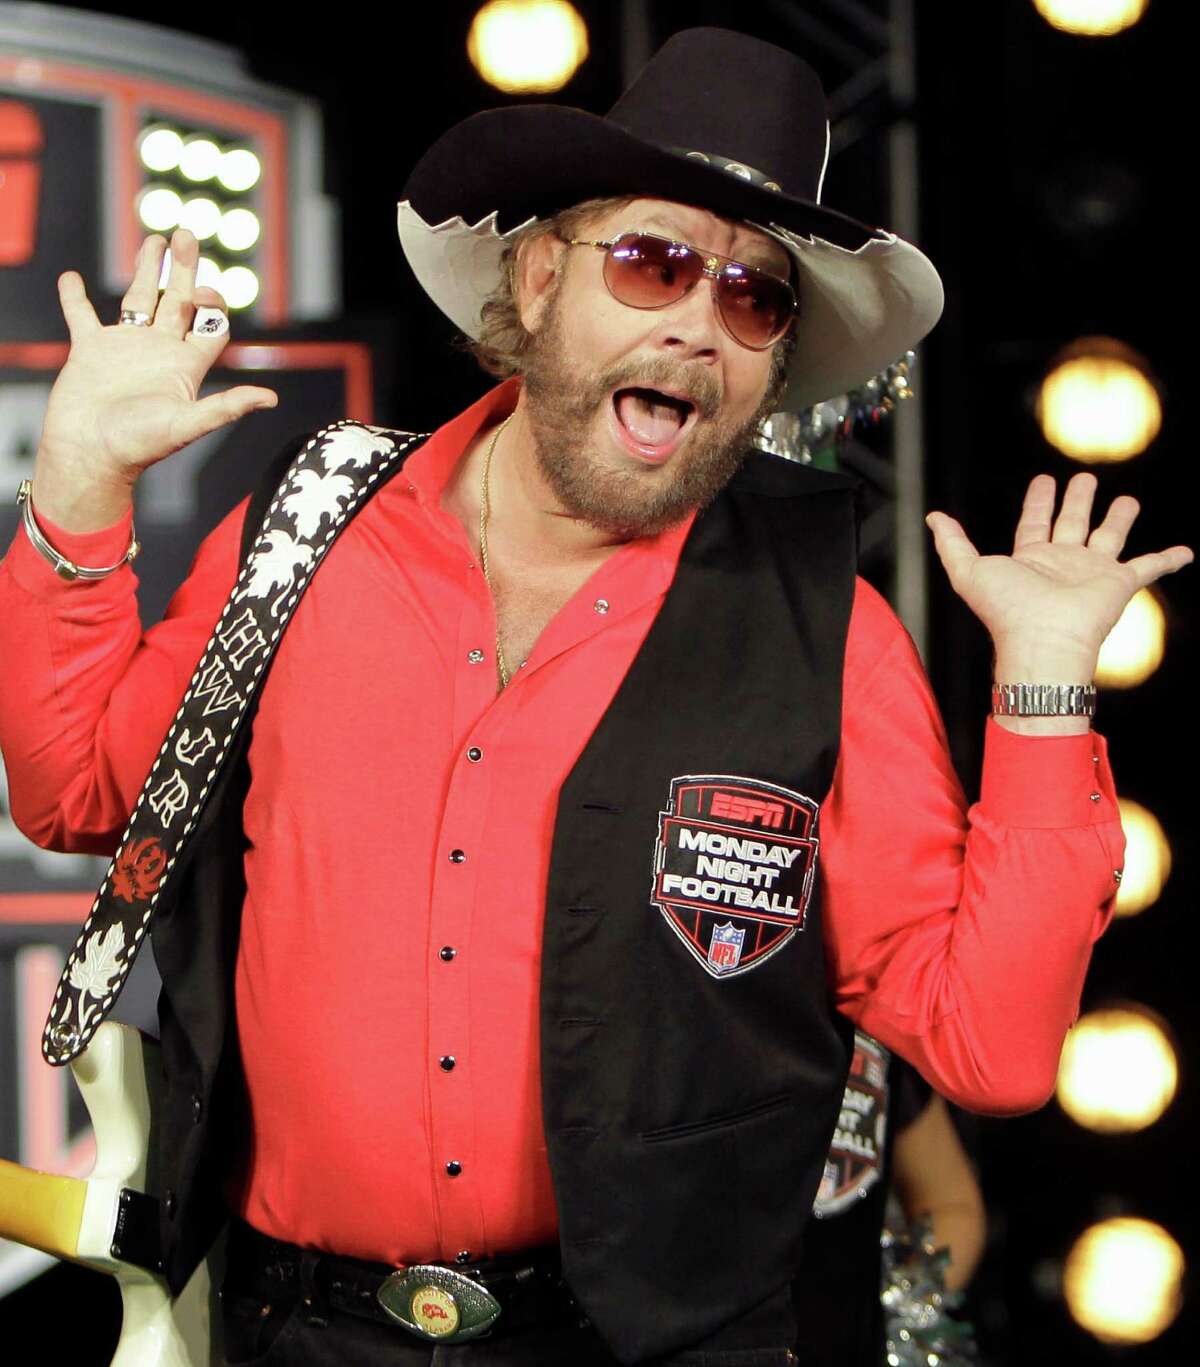 FILE - In this July 14, 2011, file photo, Hank Williams Jr. performs during the recording of a promo for ESPN's broadcasts of "Monday Night Football," in Winter Park, Fla. Are you ready for some football? Hank Williams Jr. isn't anymore. The country singer and ESPN each took credit for the decision Thursday morning, Oct. 6, 2011, to no longer use his classic intro to "Monday Night Football." The network had pulled the song from the game earlier this week after Williams made an analogy to Adolf Hitler in discussing President Barack Obama on Fox News on Monday morning. (AP Photo/John Raoux, File)